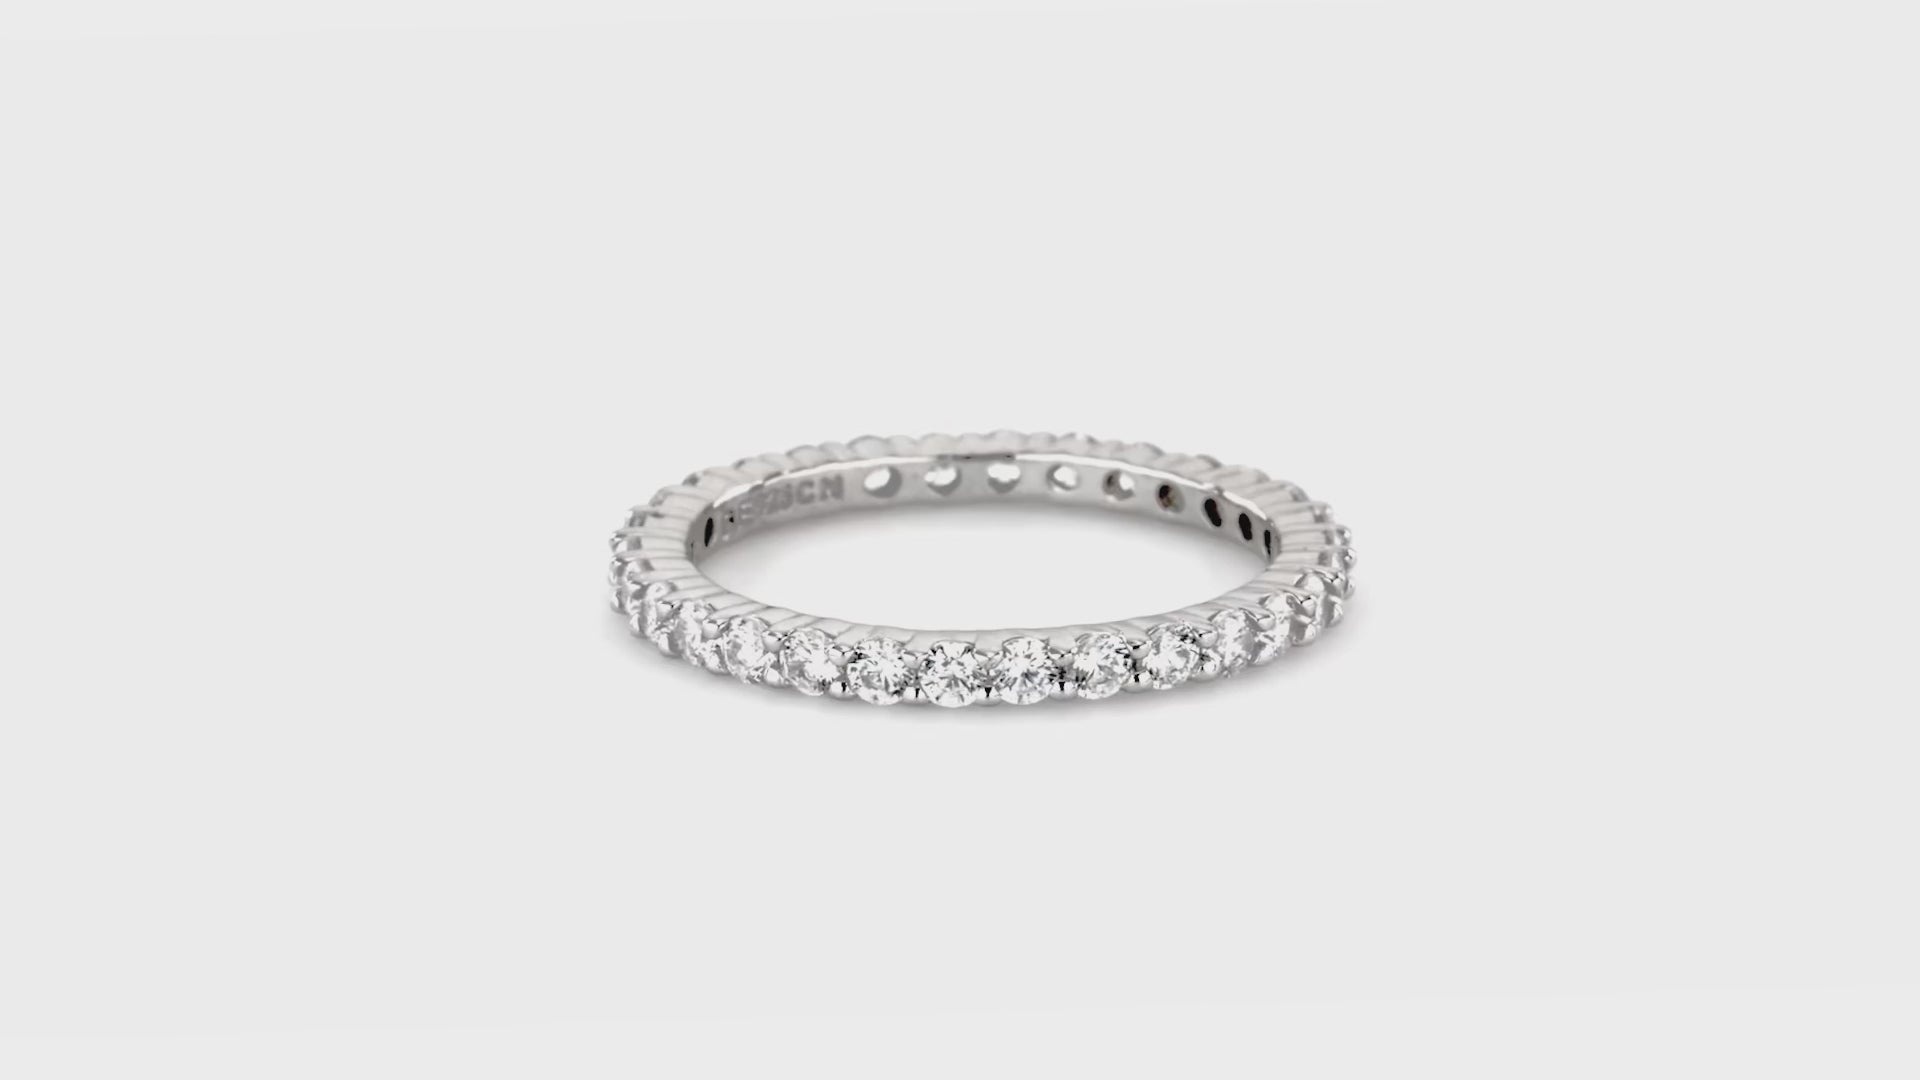 Video Contains Pave Set CZ Eternity Ring in Sterling Silver. Style Number R448-20